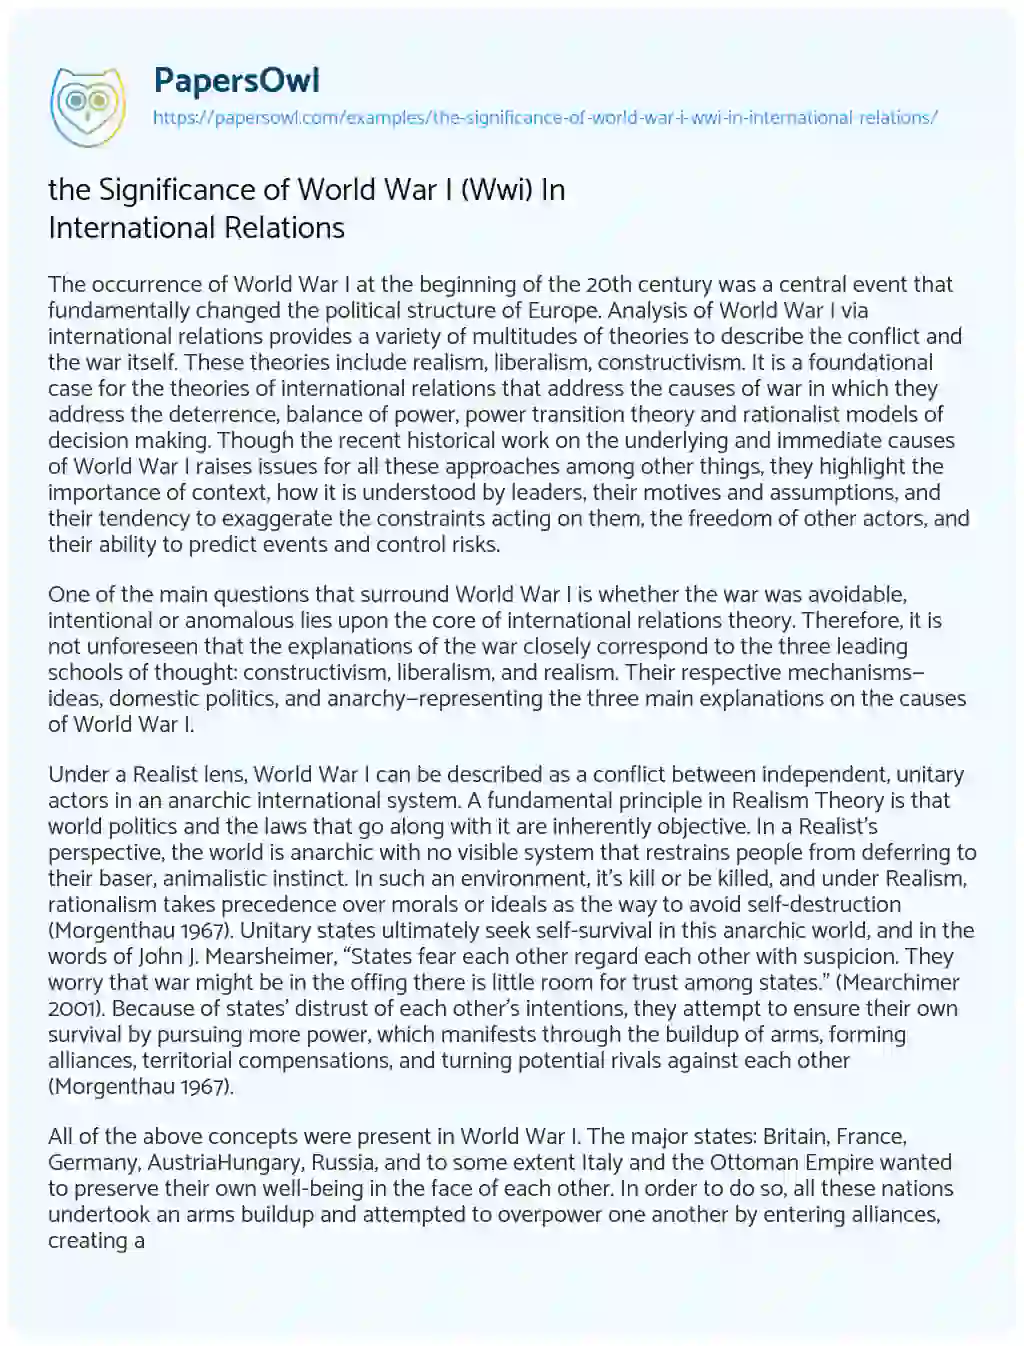 the Significance of World War i (Wwi) in International Relations essay